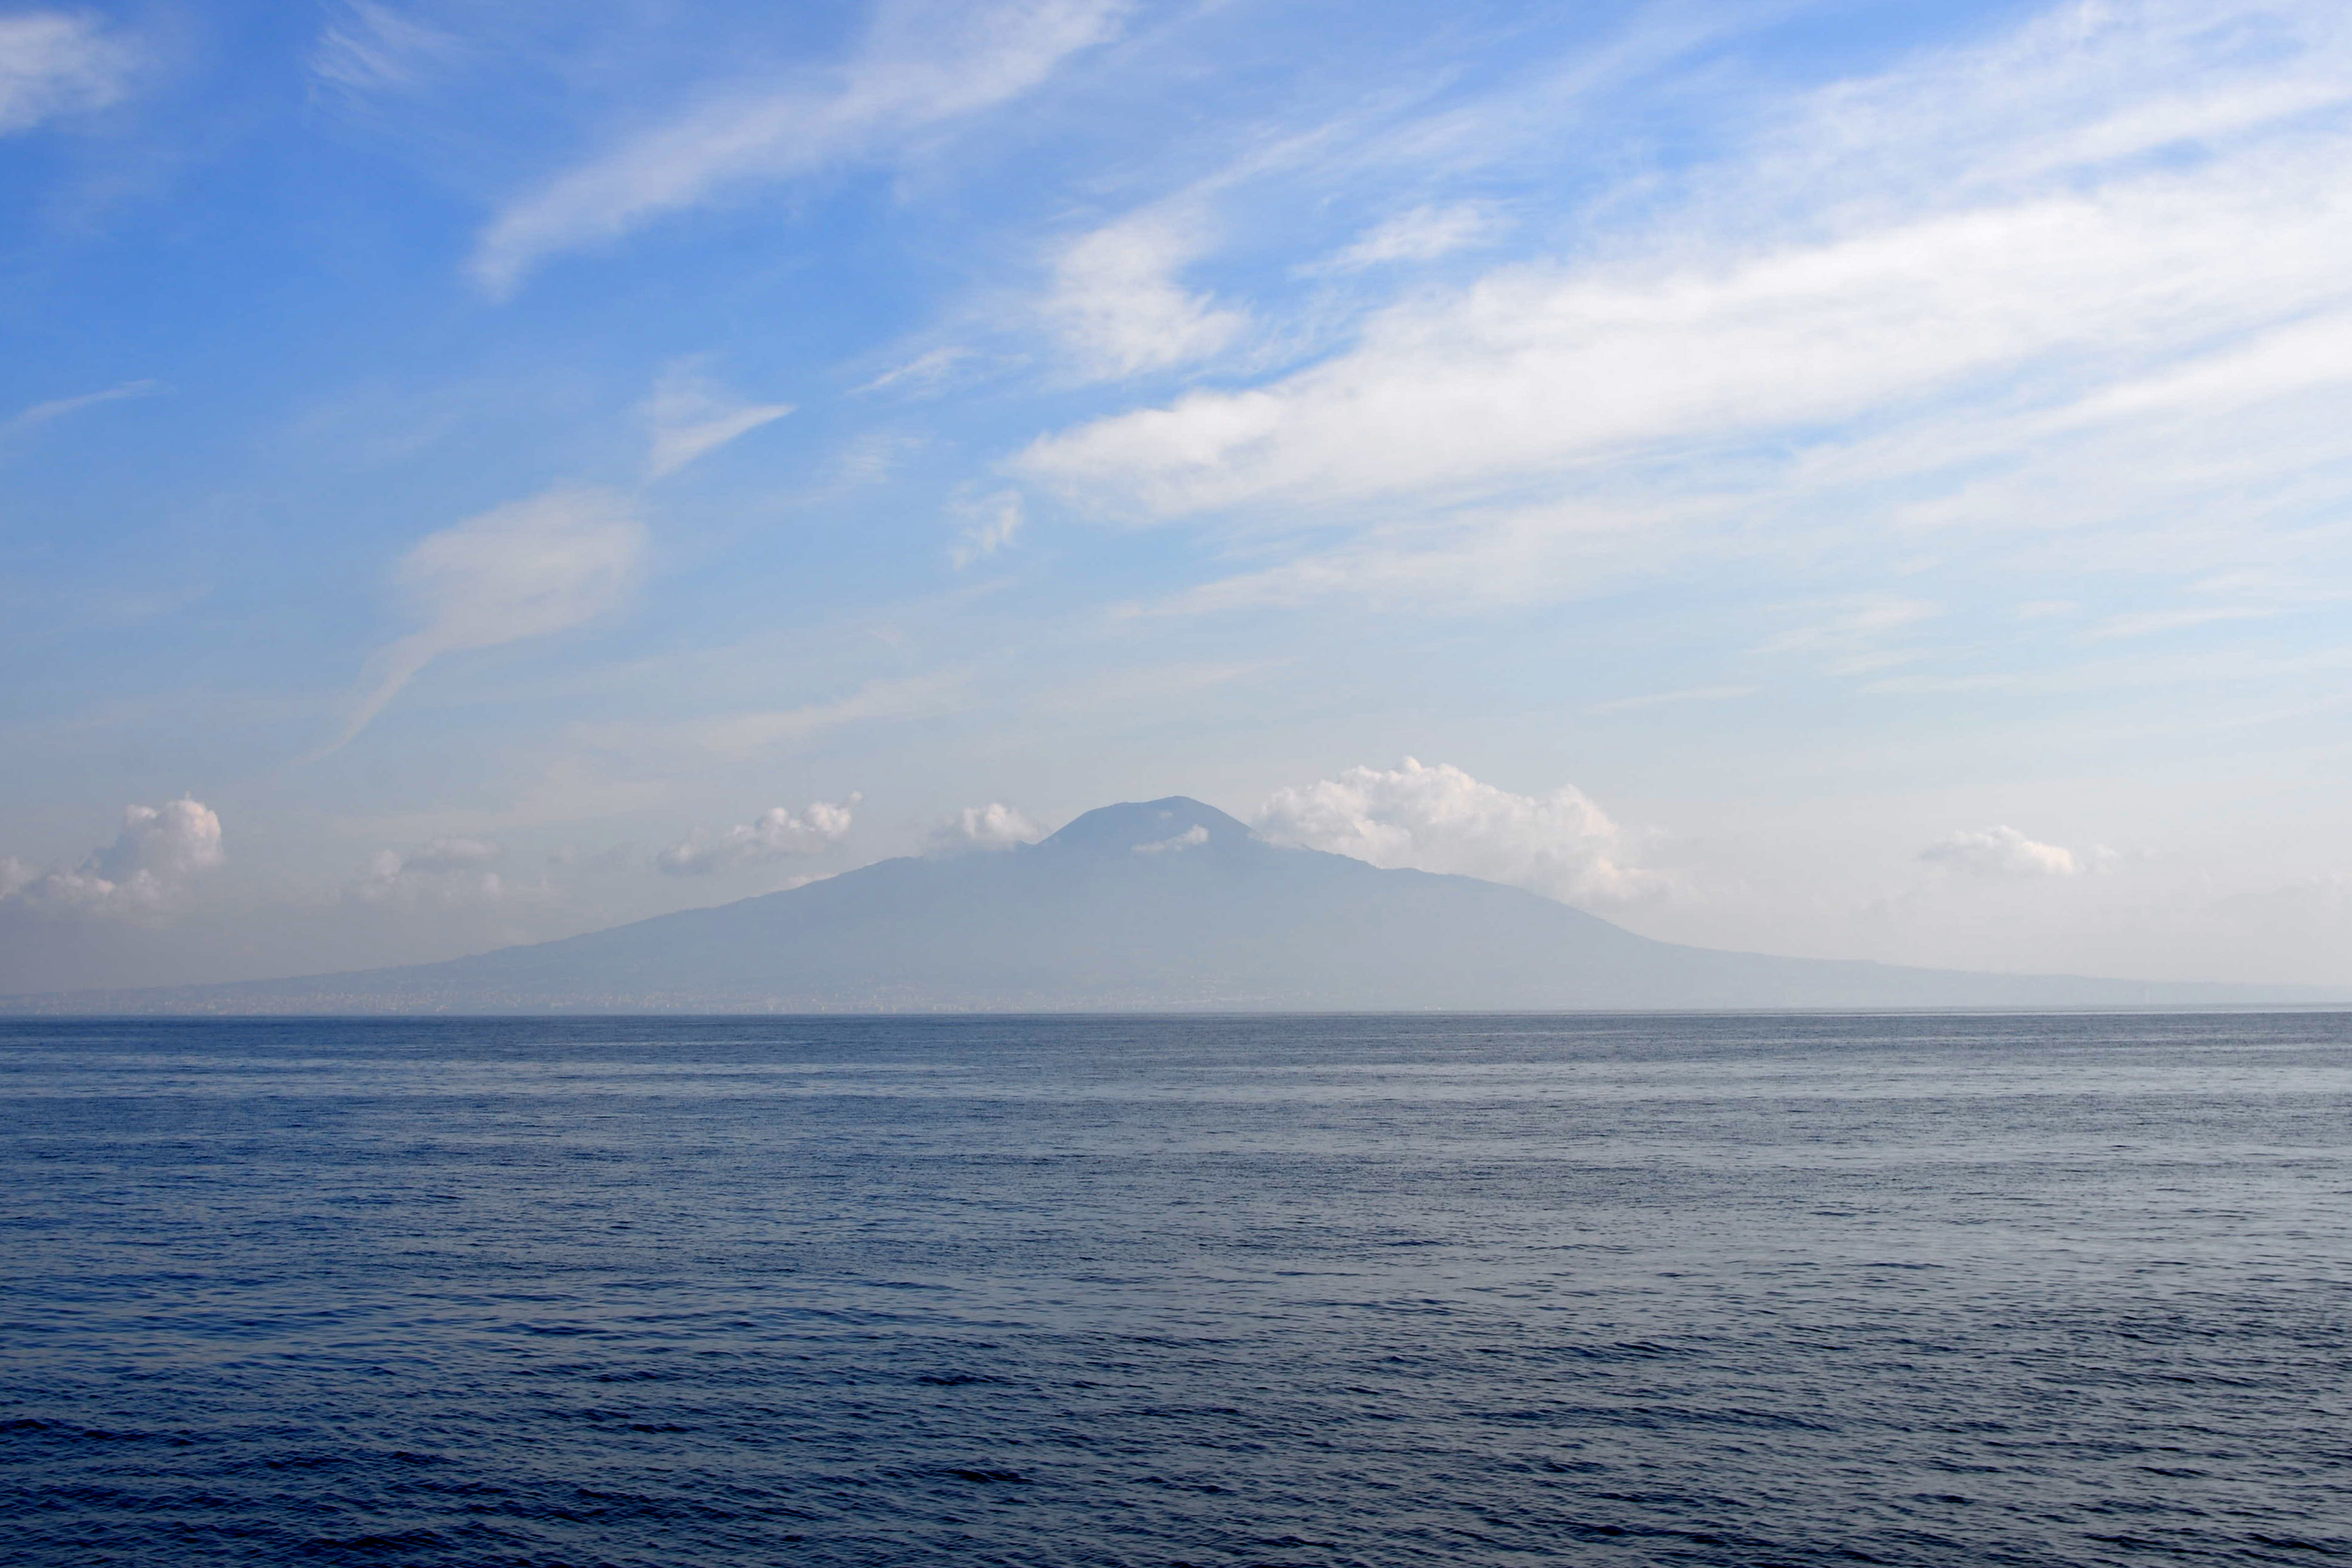 Ocean with mountain in the distance